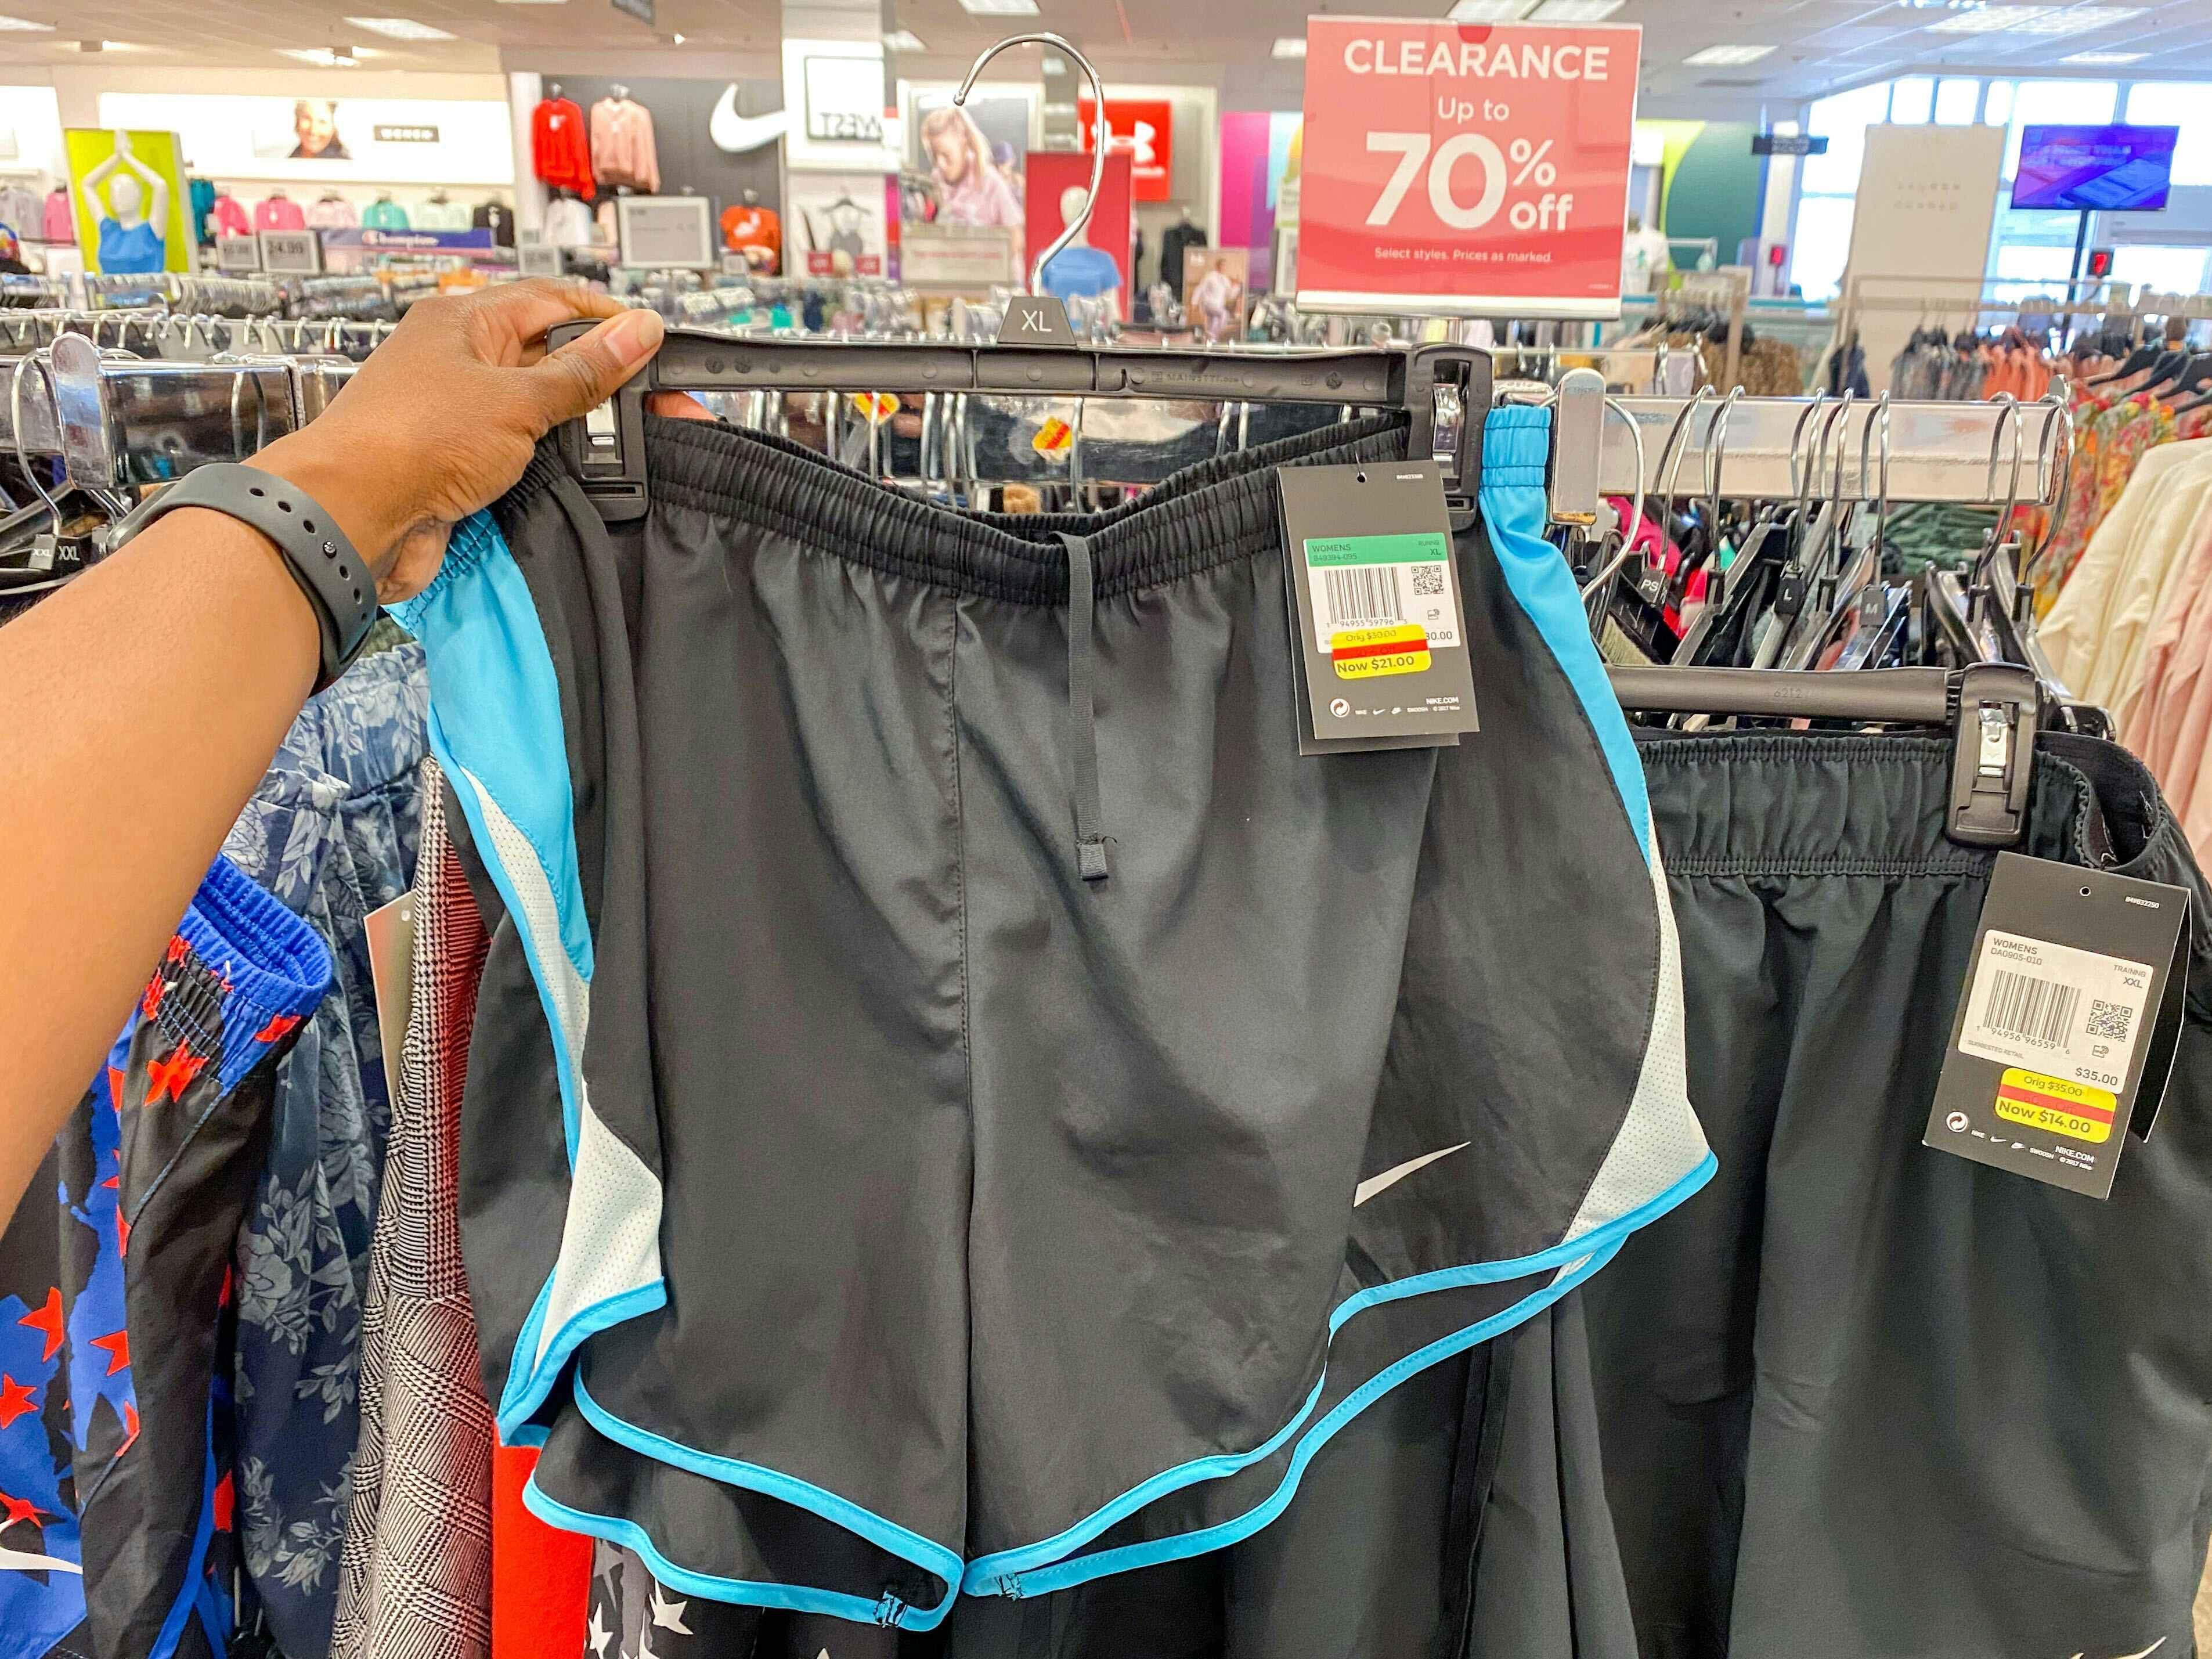 Hand holding up grey athletic shorts next to a clearance sign inside a Kohl's